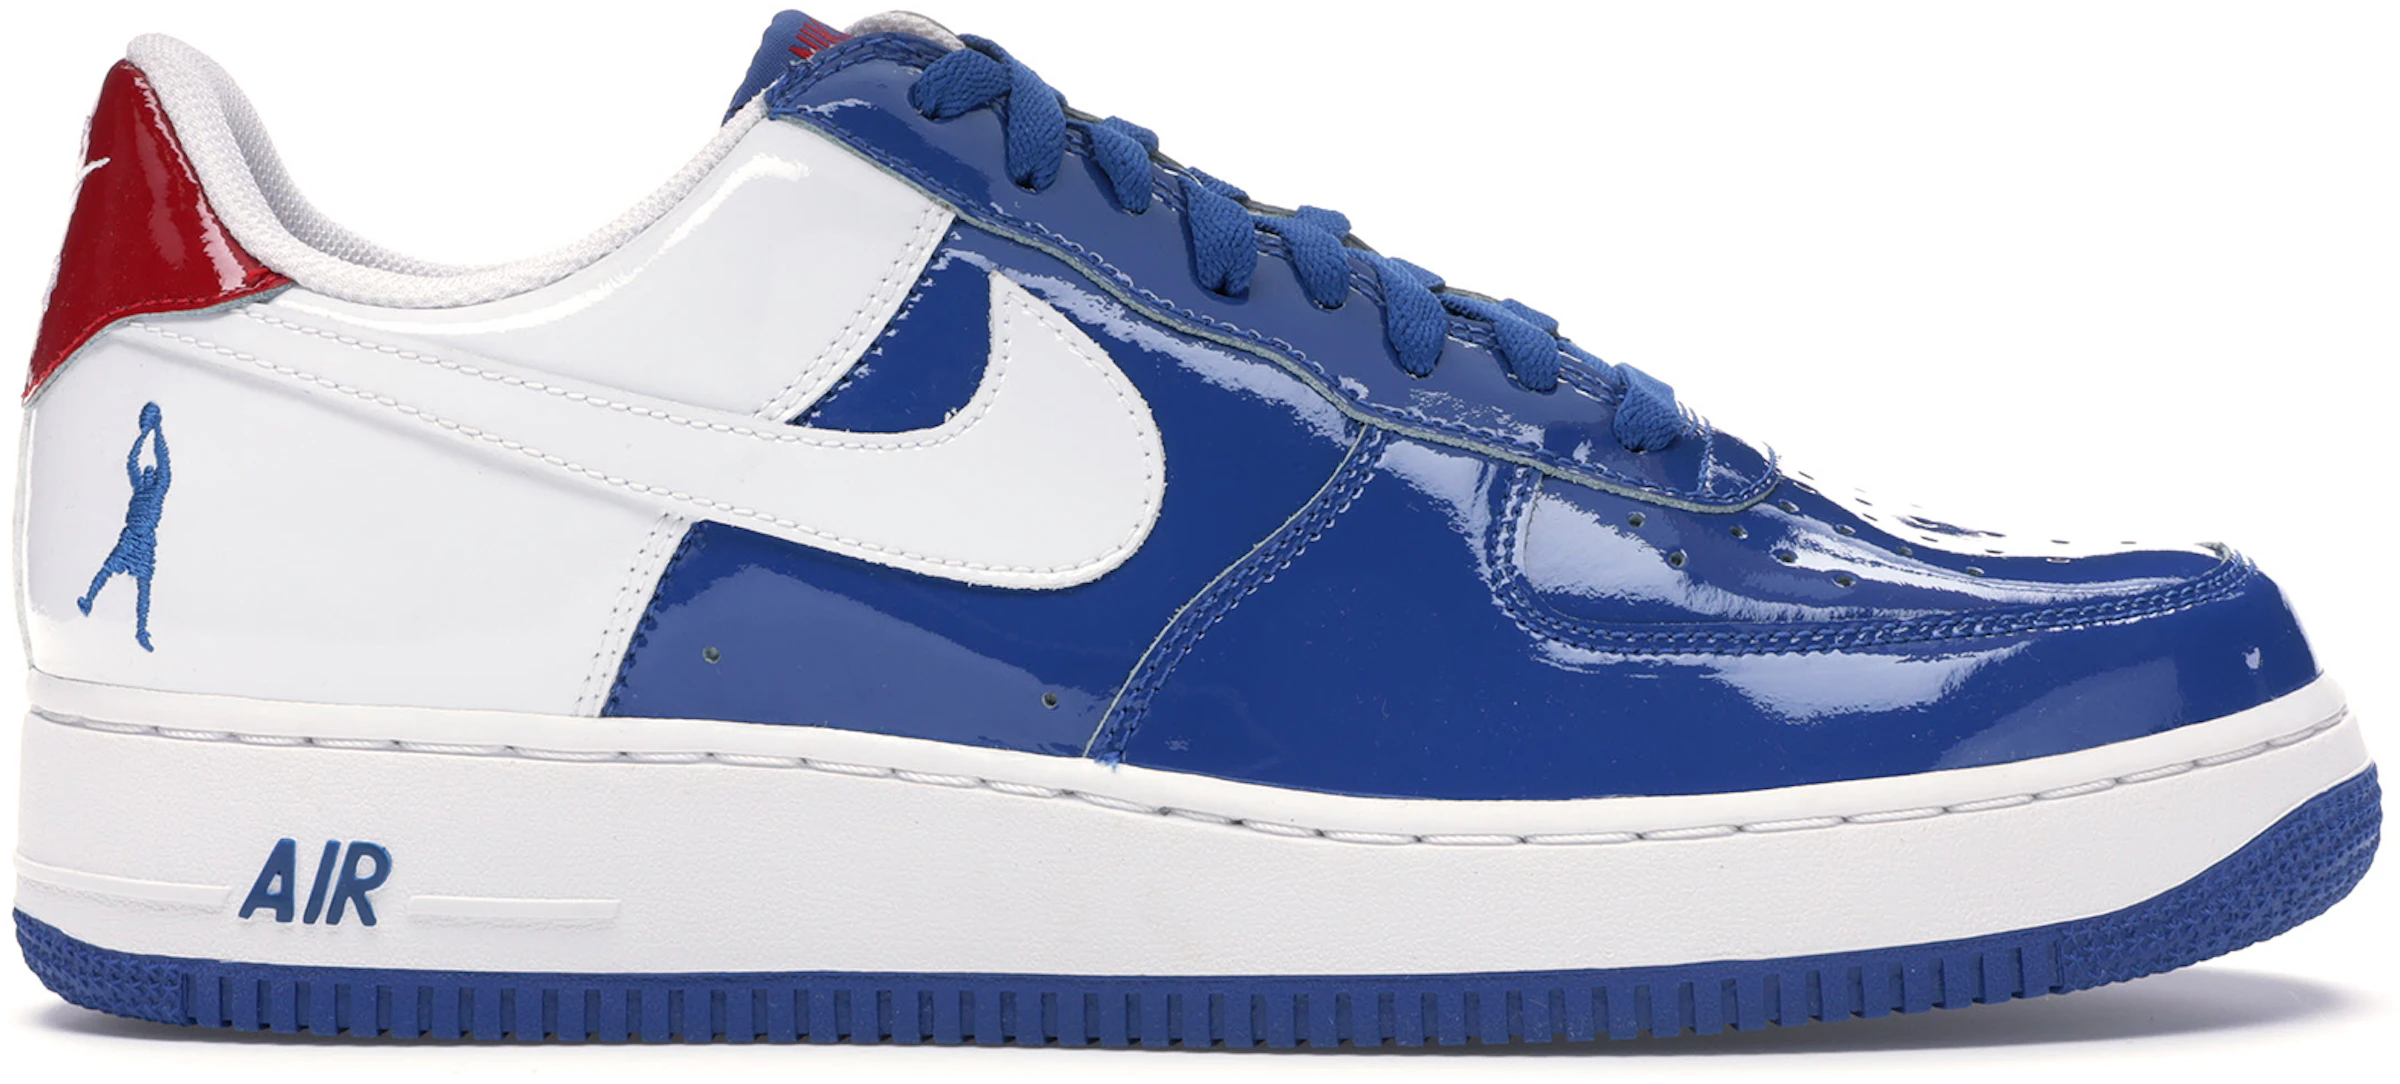 Nike Air Force 1 Low Sheed Blue Jay - 306347-411 - Us